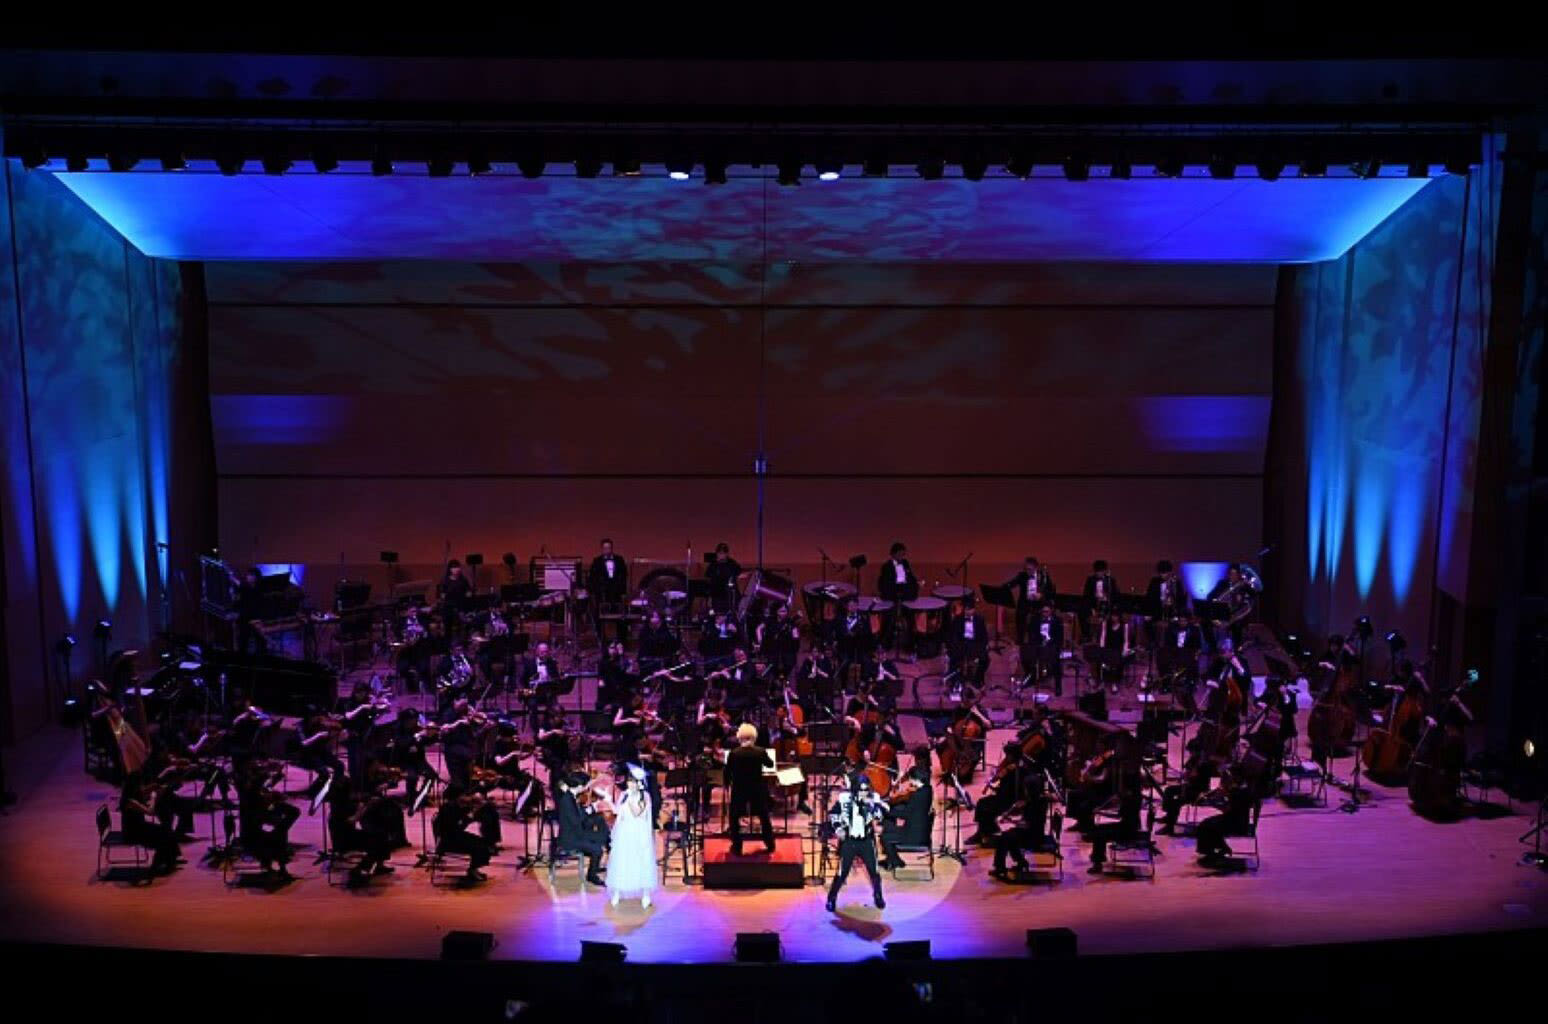 Revo Performs ‘Guren no Yumiya’ From ‘Attack on Titan’ & Is Joined by Guests on Day 2 of Orchestra Concert Series